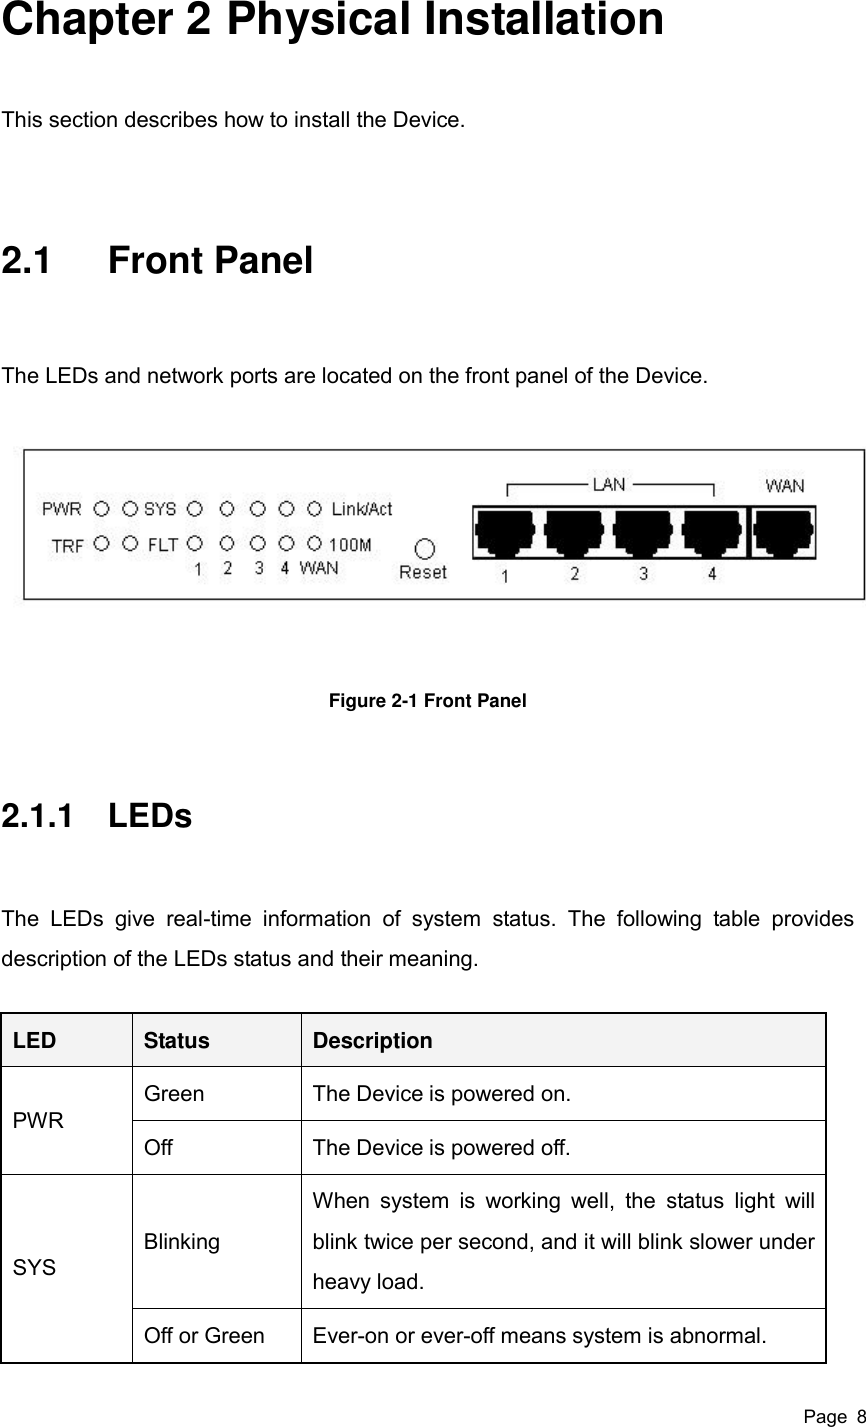  Page  8 Chapter 2 Physical Installation This section describes how to install the Device. 2.1  Front Panel   The LEDs and network ports are located on the front panel of the Device.    Figure 2-1 Front Panel 2.1.1  LEDs The  LEDs  give  real-time  information  of  system  status.  The  following  table  provides description of the LEDs status and their meaning. LED Status Description PWR Green The Device is powered on. Off The Device is powered off. SYS Blinking When  system  is  working  well,  the  status  light  will blink twice per second, and it will blink slower under heavy load. Off or Green Ever-on or ever-off means system is abnormal. 